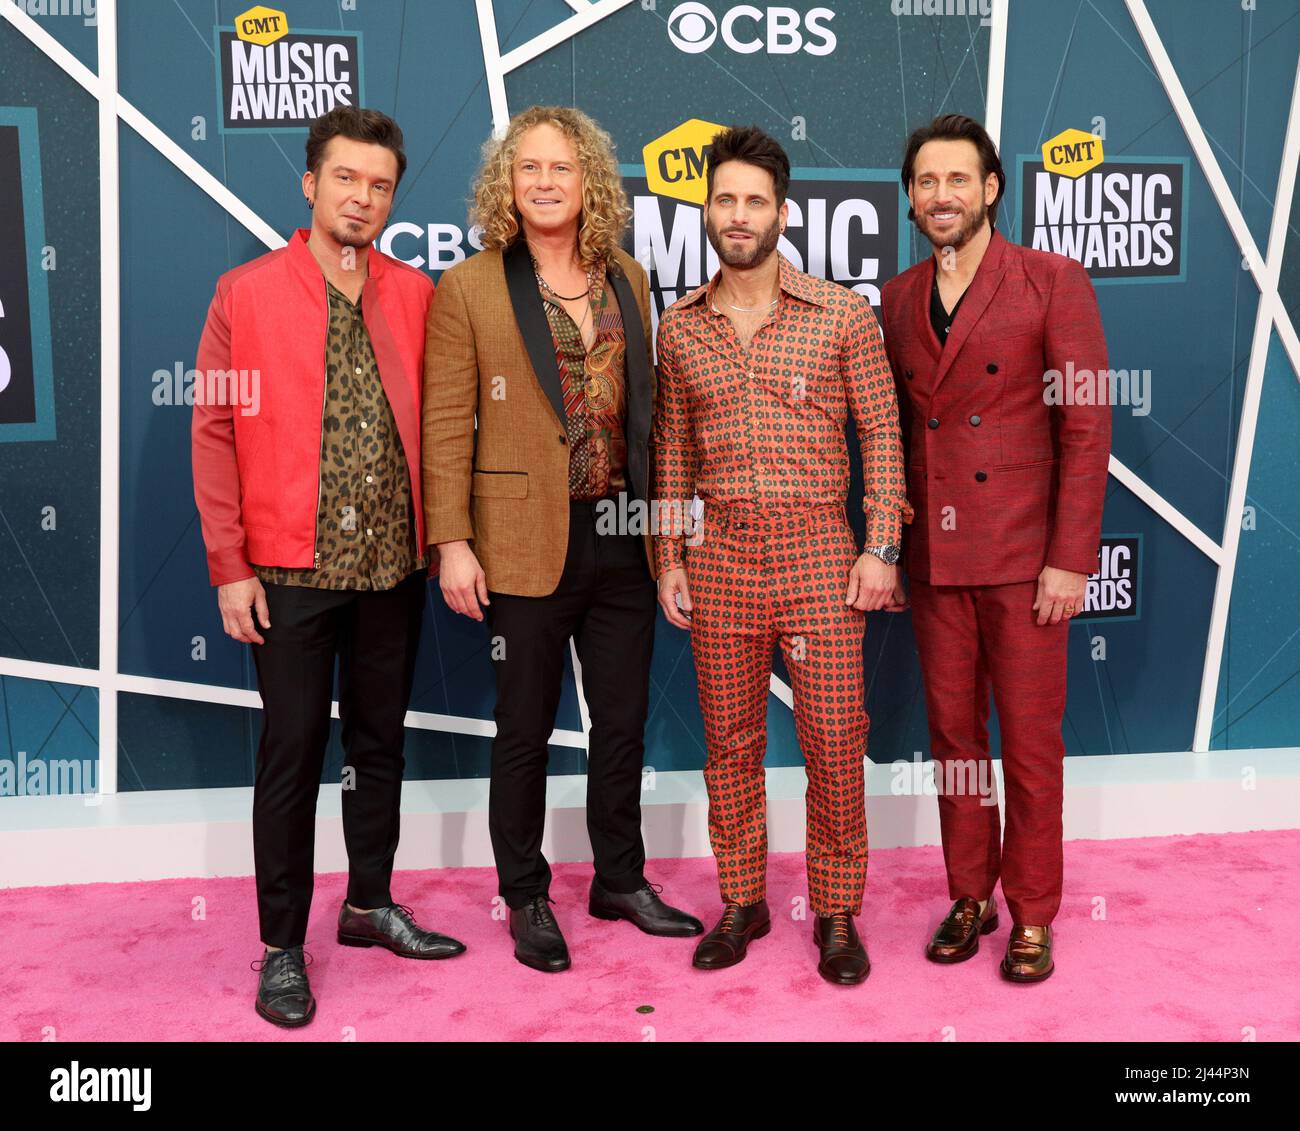 Tennessee, United States. 12th Apr, 2022. The group Parmalee arrives at the CMT Music Awards at the Municipal Auditorium in Nashville, Tennessee, Monday, April 11, 2022. Photo by John Sommers II/UPI Credit: UPI/Alamy Live News Stock Photo